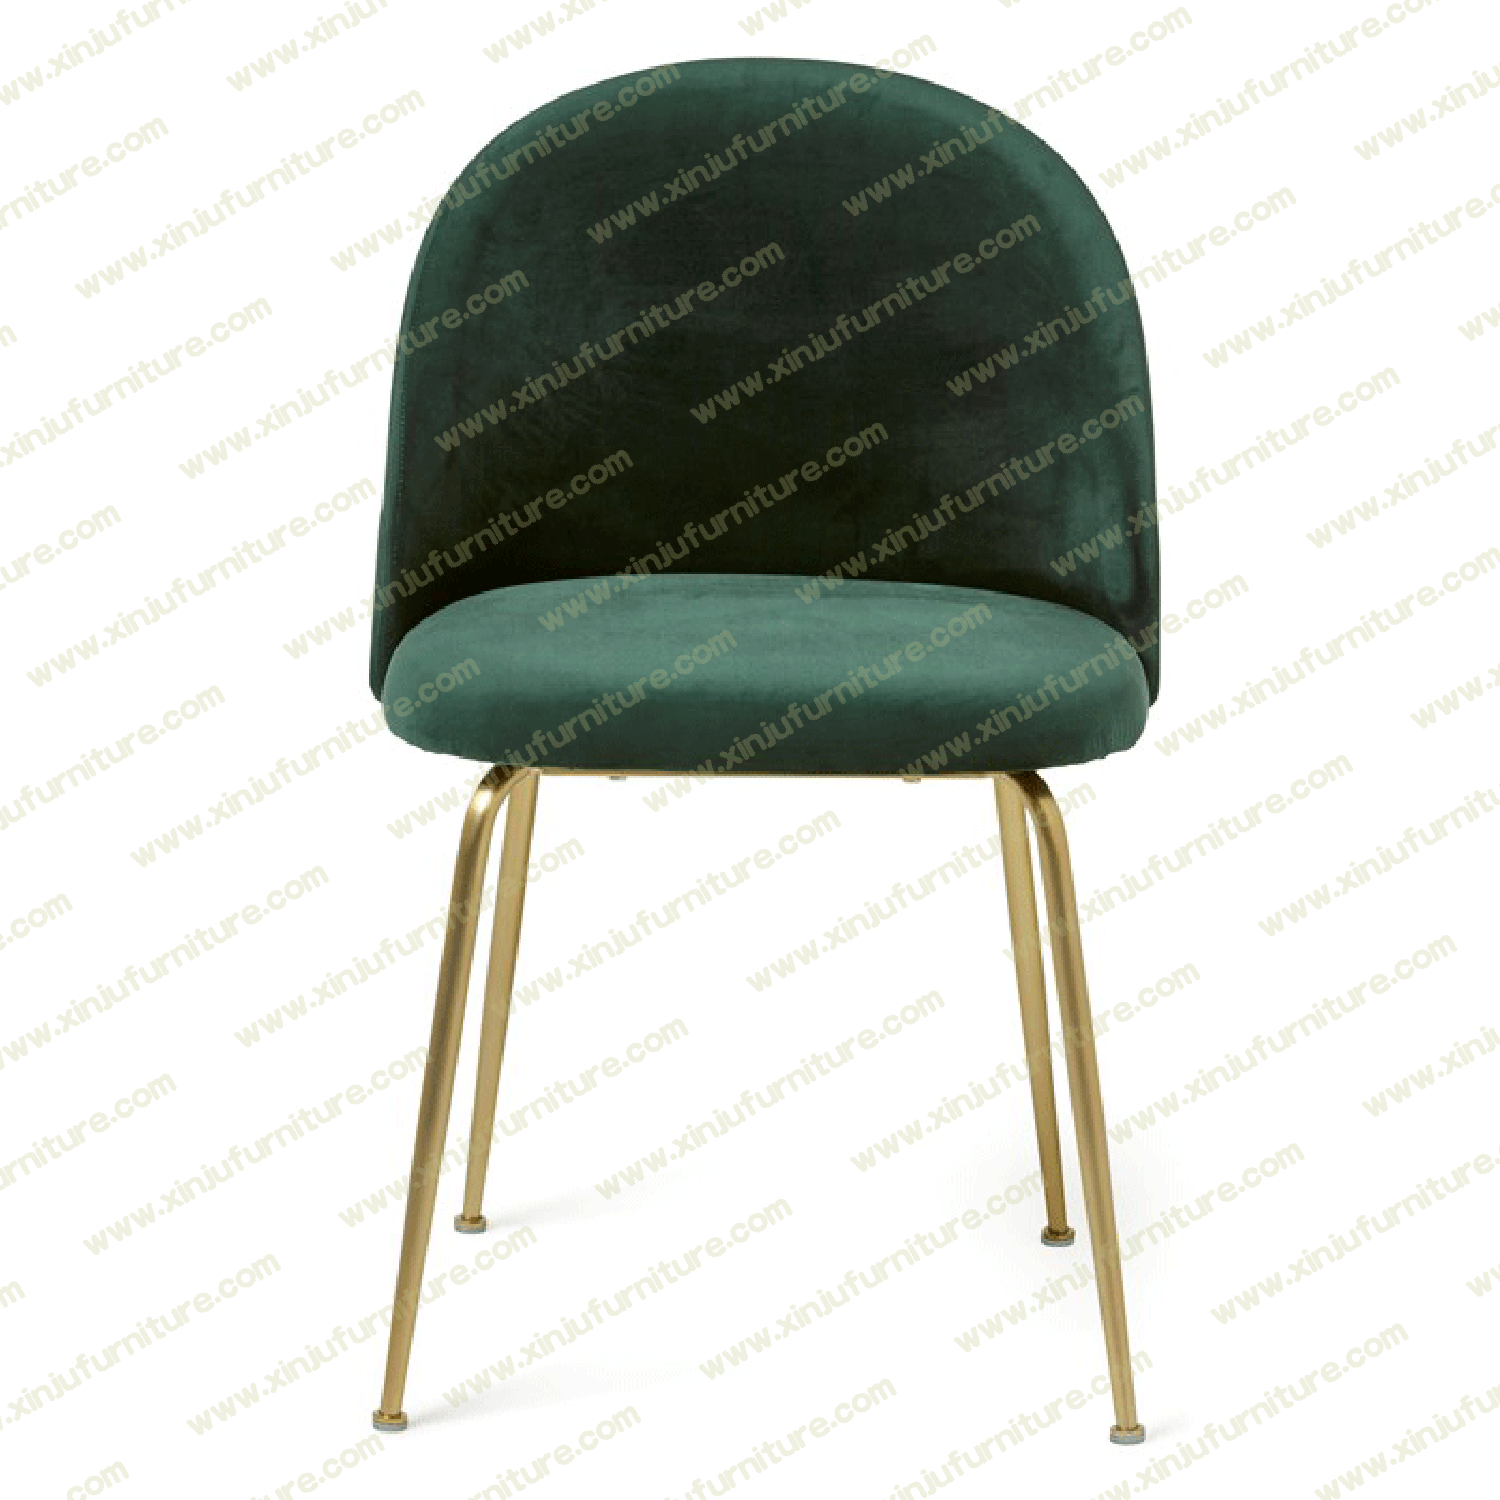 Tufted cute colorful dining chair dark green